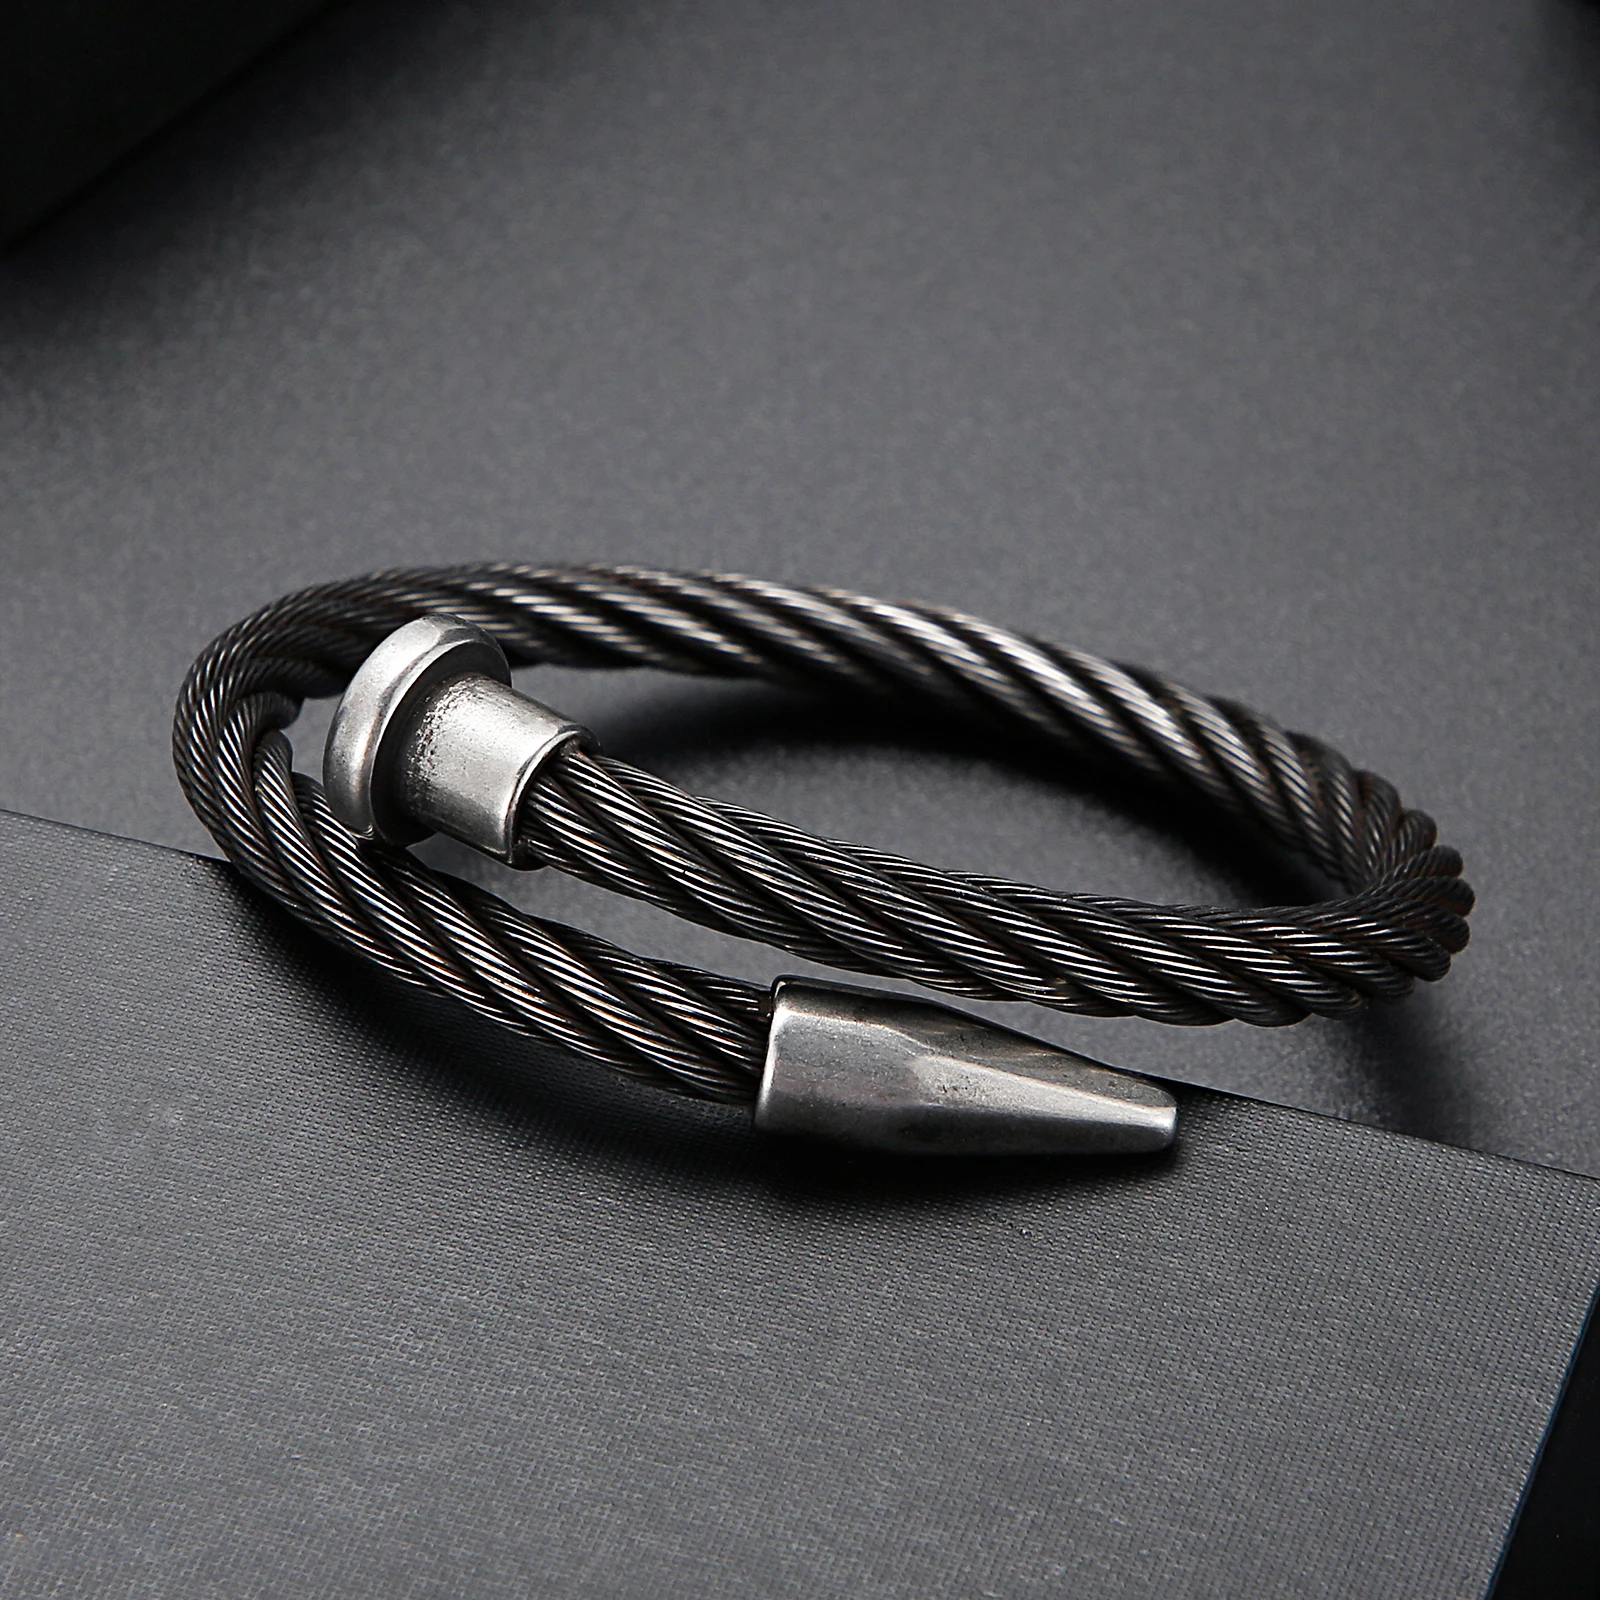 

Stainless Steel Vintage Punk Bangle Men Bracelet Titanium Opening Cuff Charm Jewelry Pulseras Hombre Nail Wire Bangles